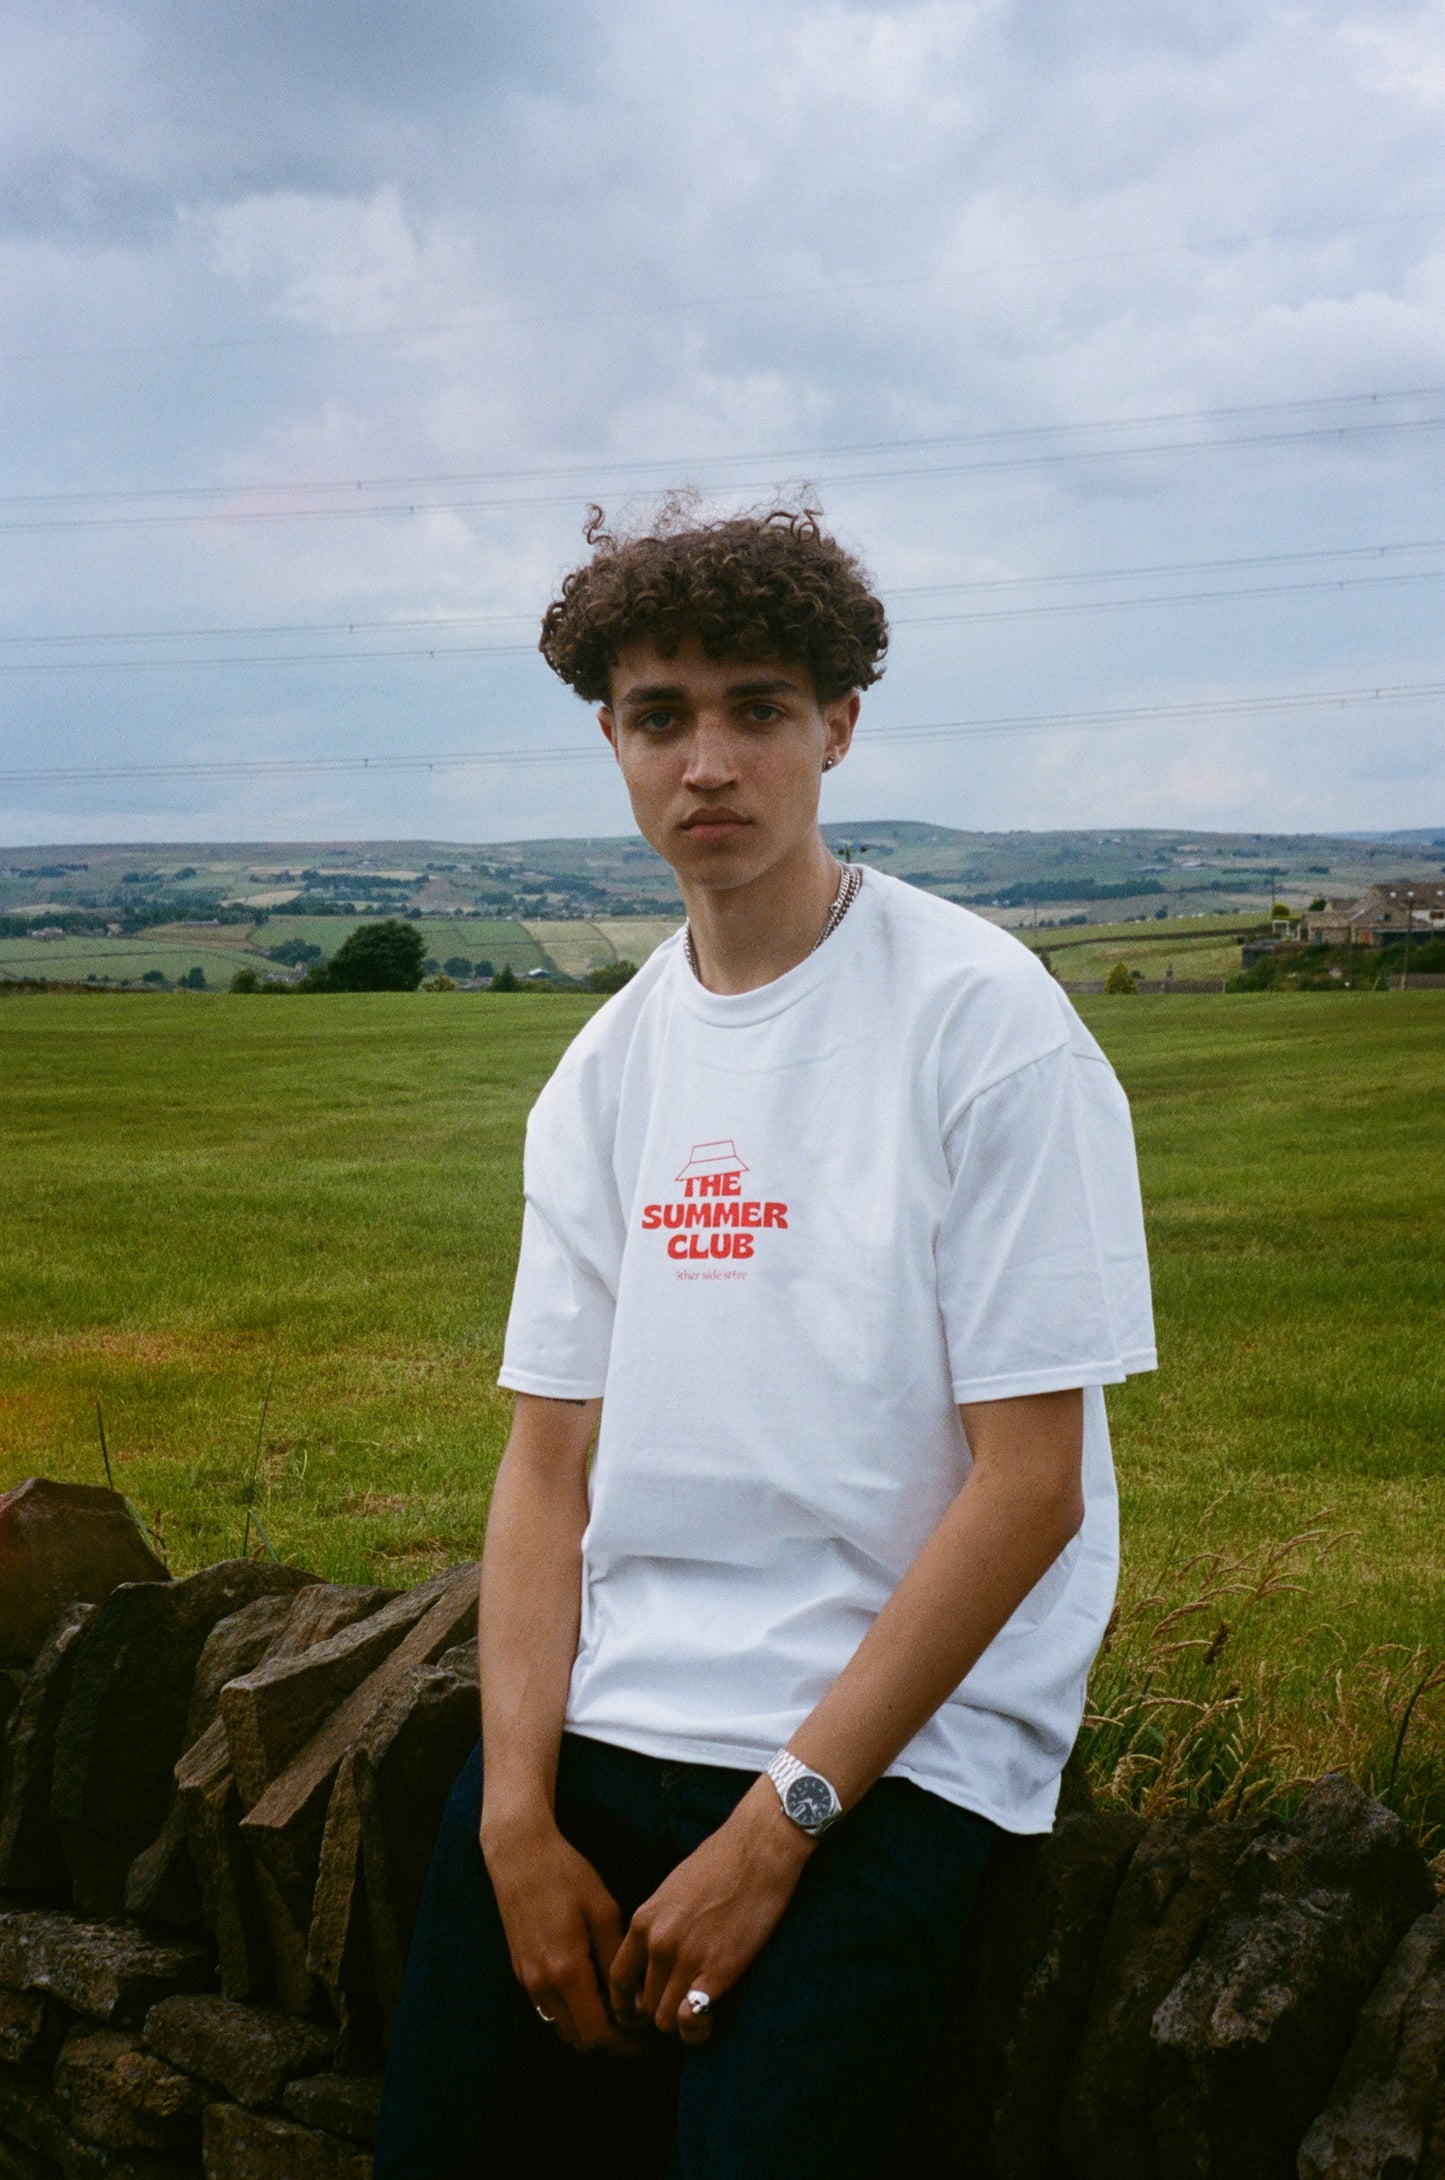 Other Side Store 'Summer Club' Tee - White